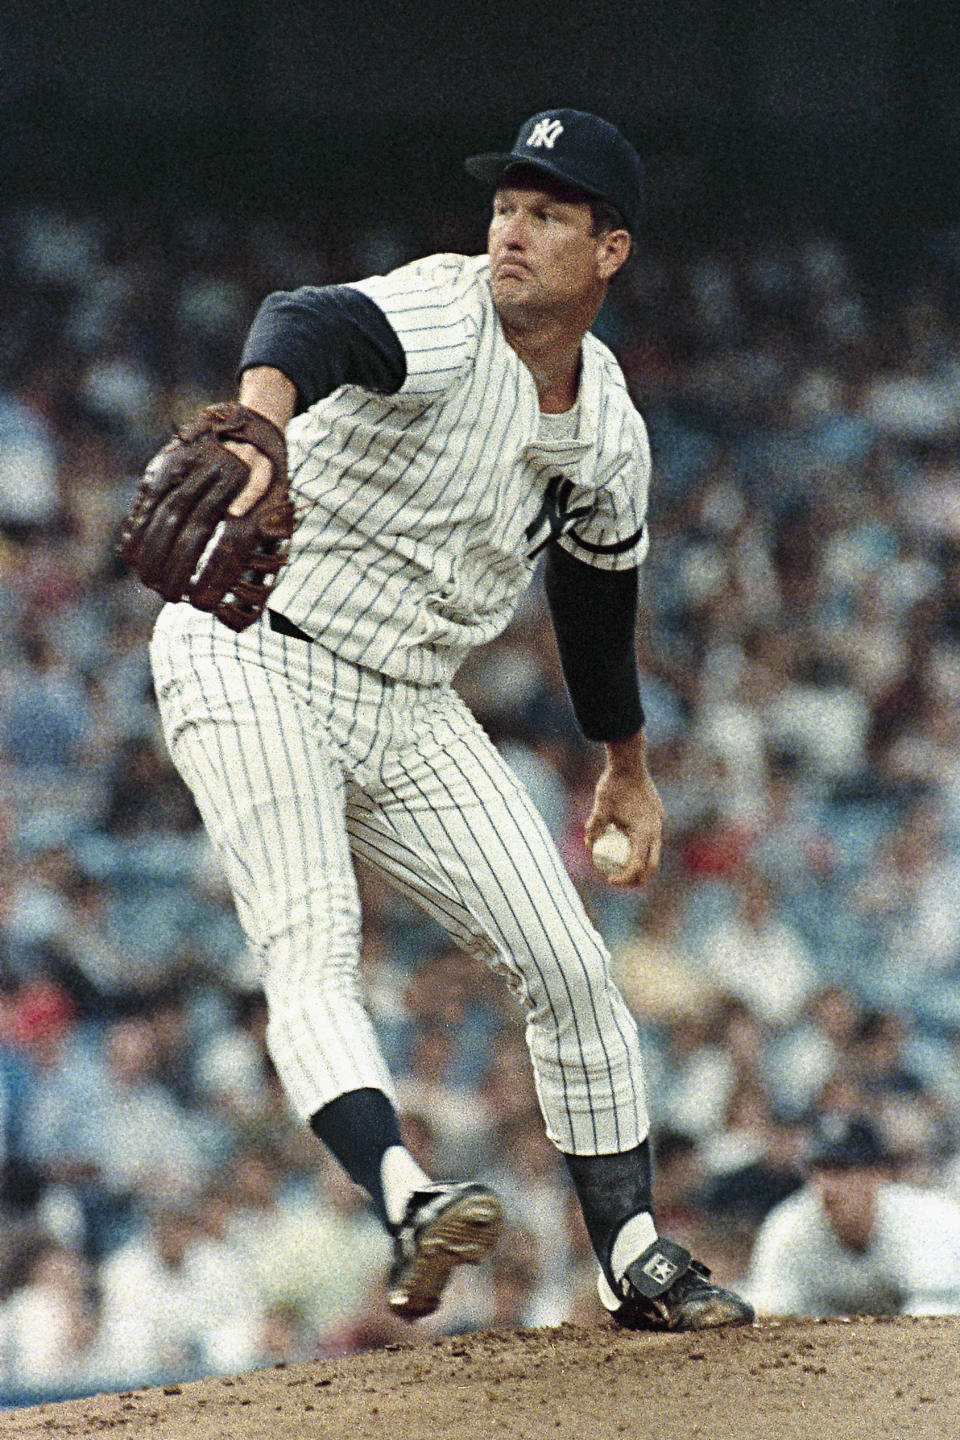 FILE - New York Yankees Tommy John pitches during a game against the Kansas City Royals at Yankee Stadium in New York, Aug. 8, 1986. Almost 50 years ago, on Sept. 25, 1974, Dr. Frank Jobe reconstructed a torn ulnar collateral ligament in John's left arm. It was a pioneering achievement for Jobe and a lifeline for John, who went from a career-ending injury to 14 more years in the majors — and an eponymous connection to sports medicine that would live on long past his playing days. Tommy John surgery.(AP Photo/Ron Frehm, File)